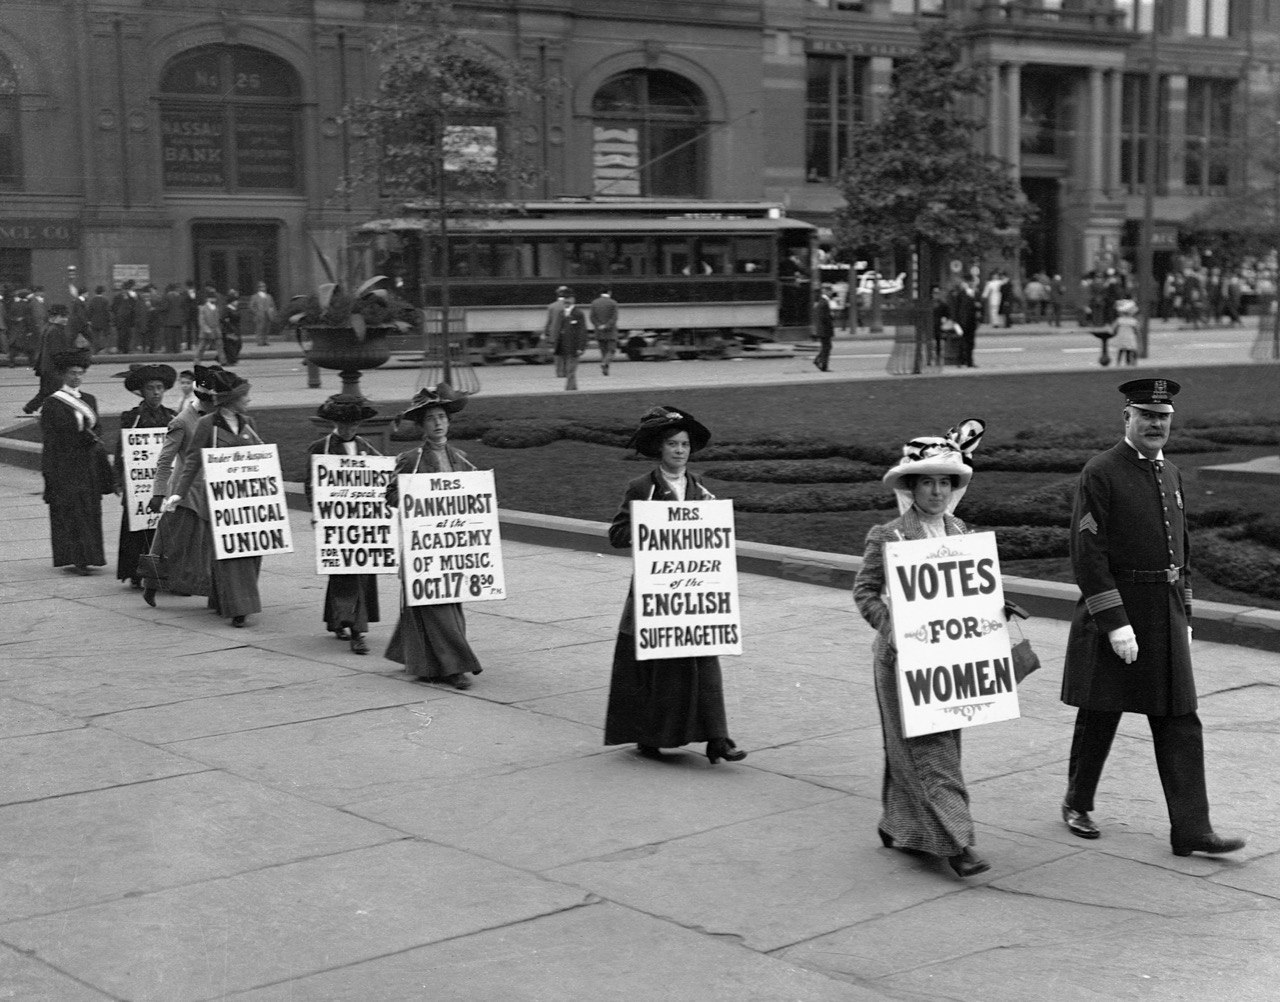   Suffragettes parade down Bedford Avenue in Brooklyn wearing signs reading "Votes for Women"